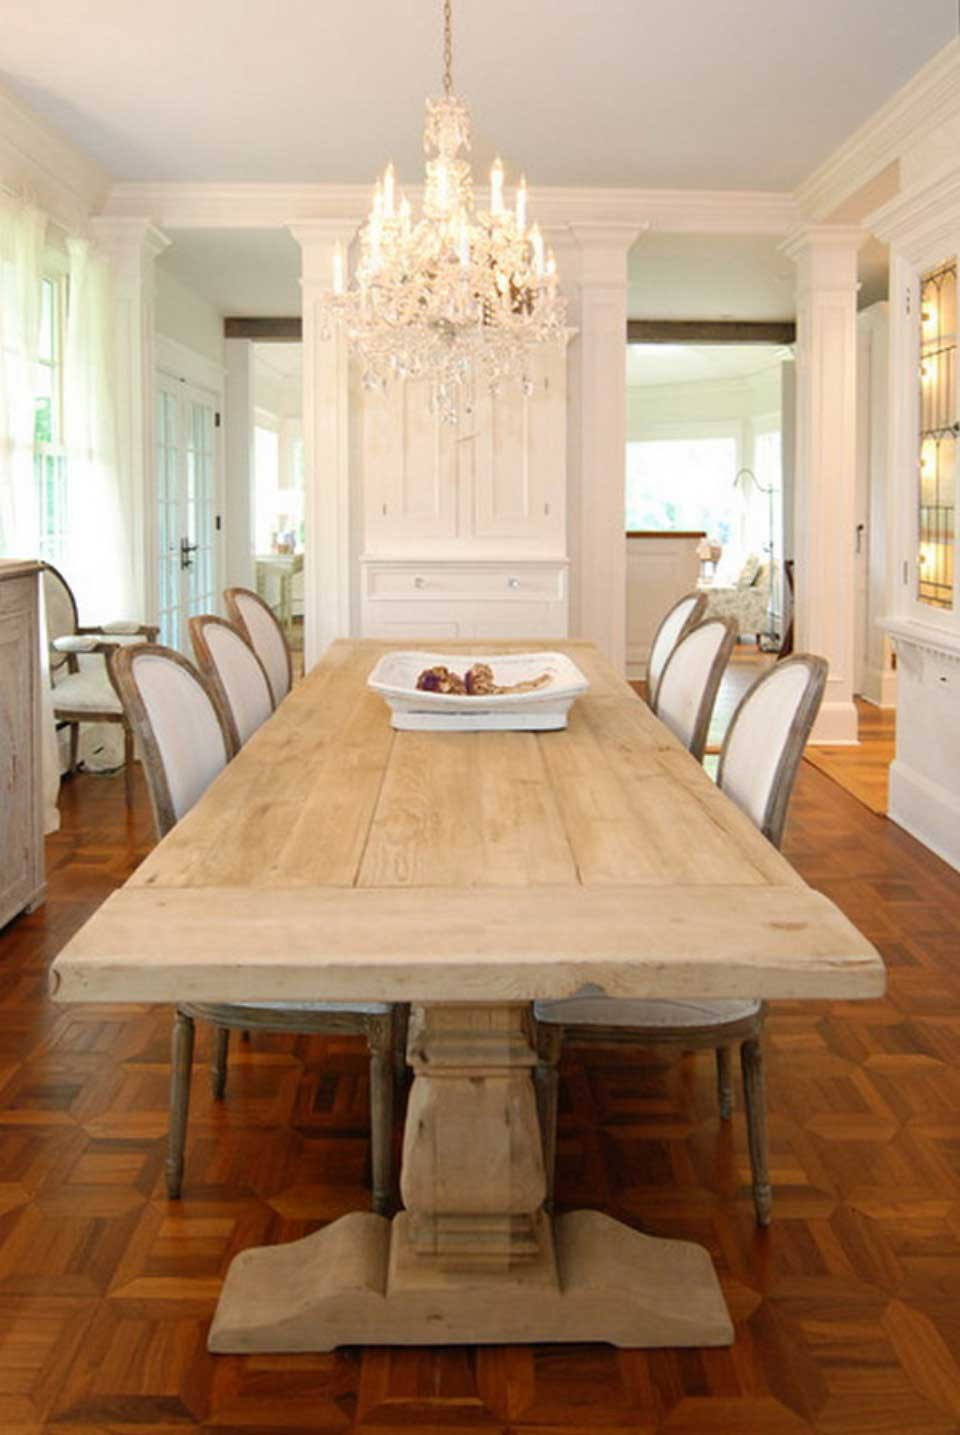 Wooden Dining Table Idea the Best Simple Dining Room Ideas Amaza Design